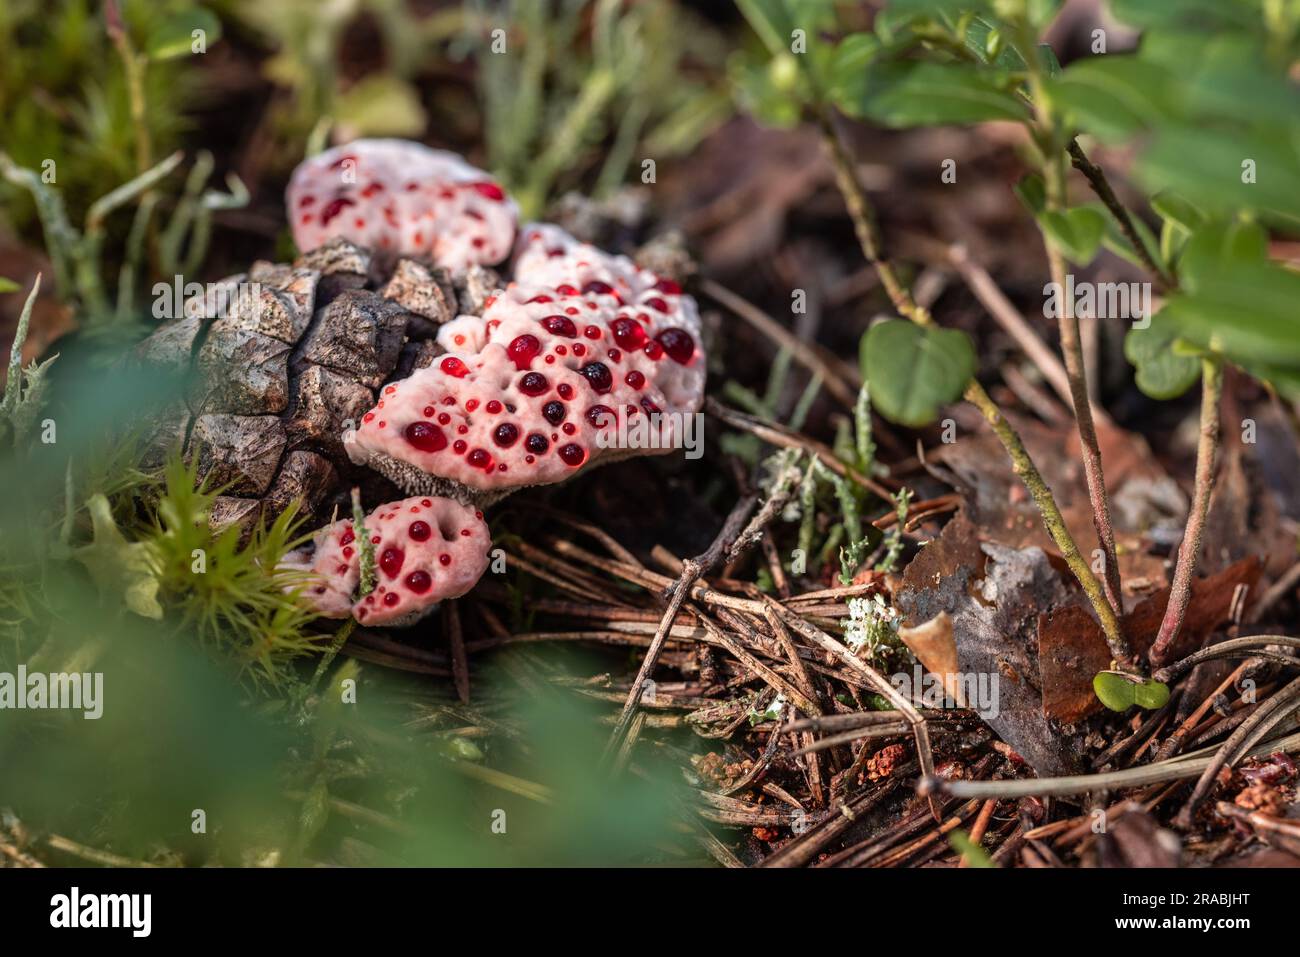 Inedible Hydnellum peckii fungus with funnel-shaped cap with a white edge and bright red guttation droplets, common names: strawberries and cream Stock Photo